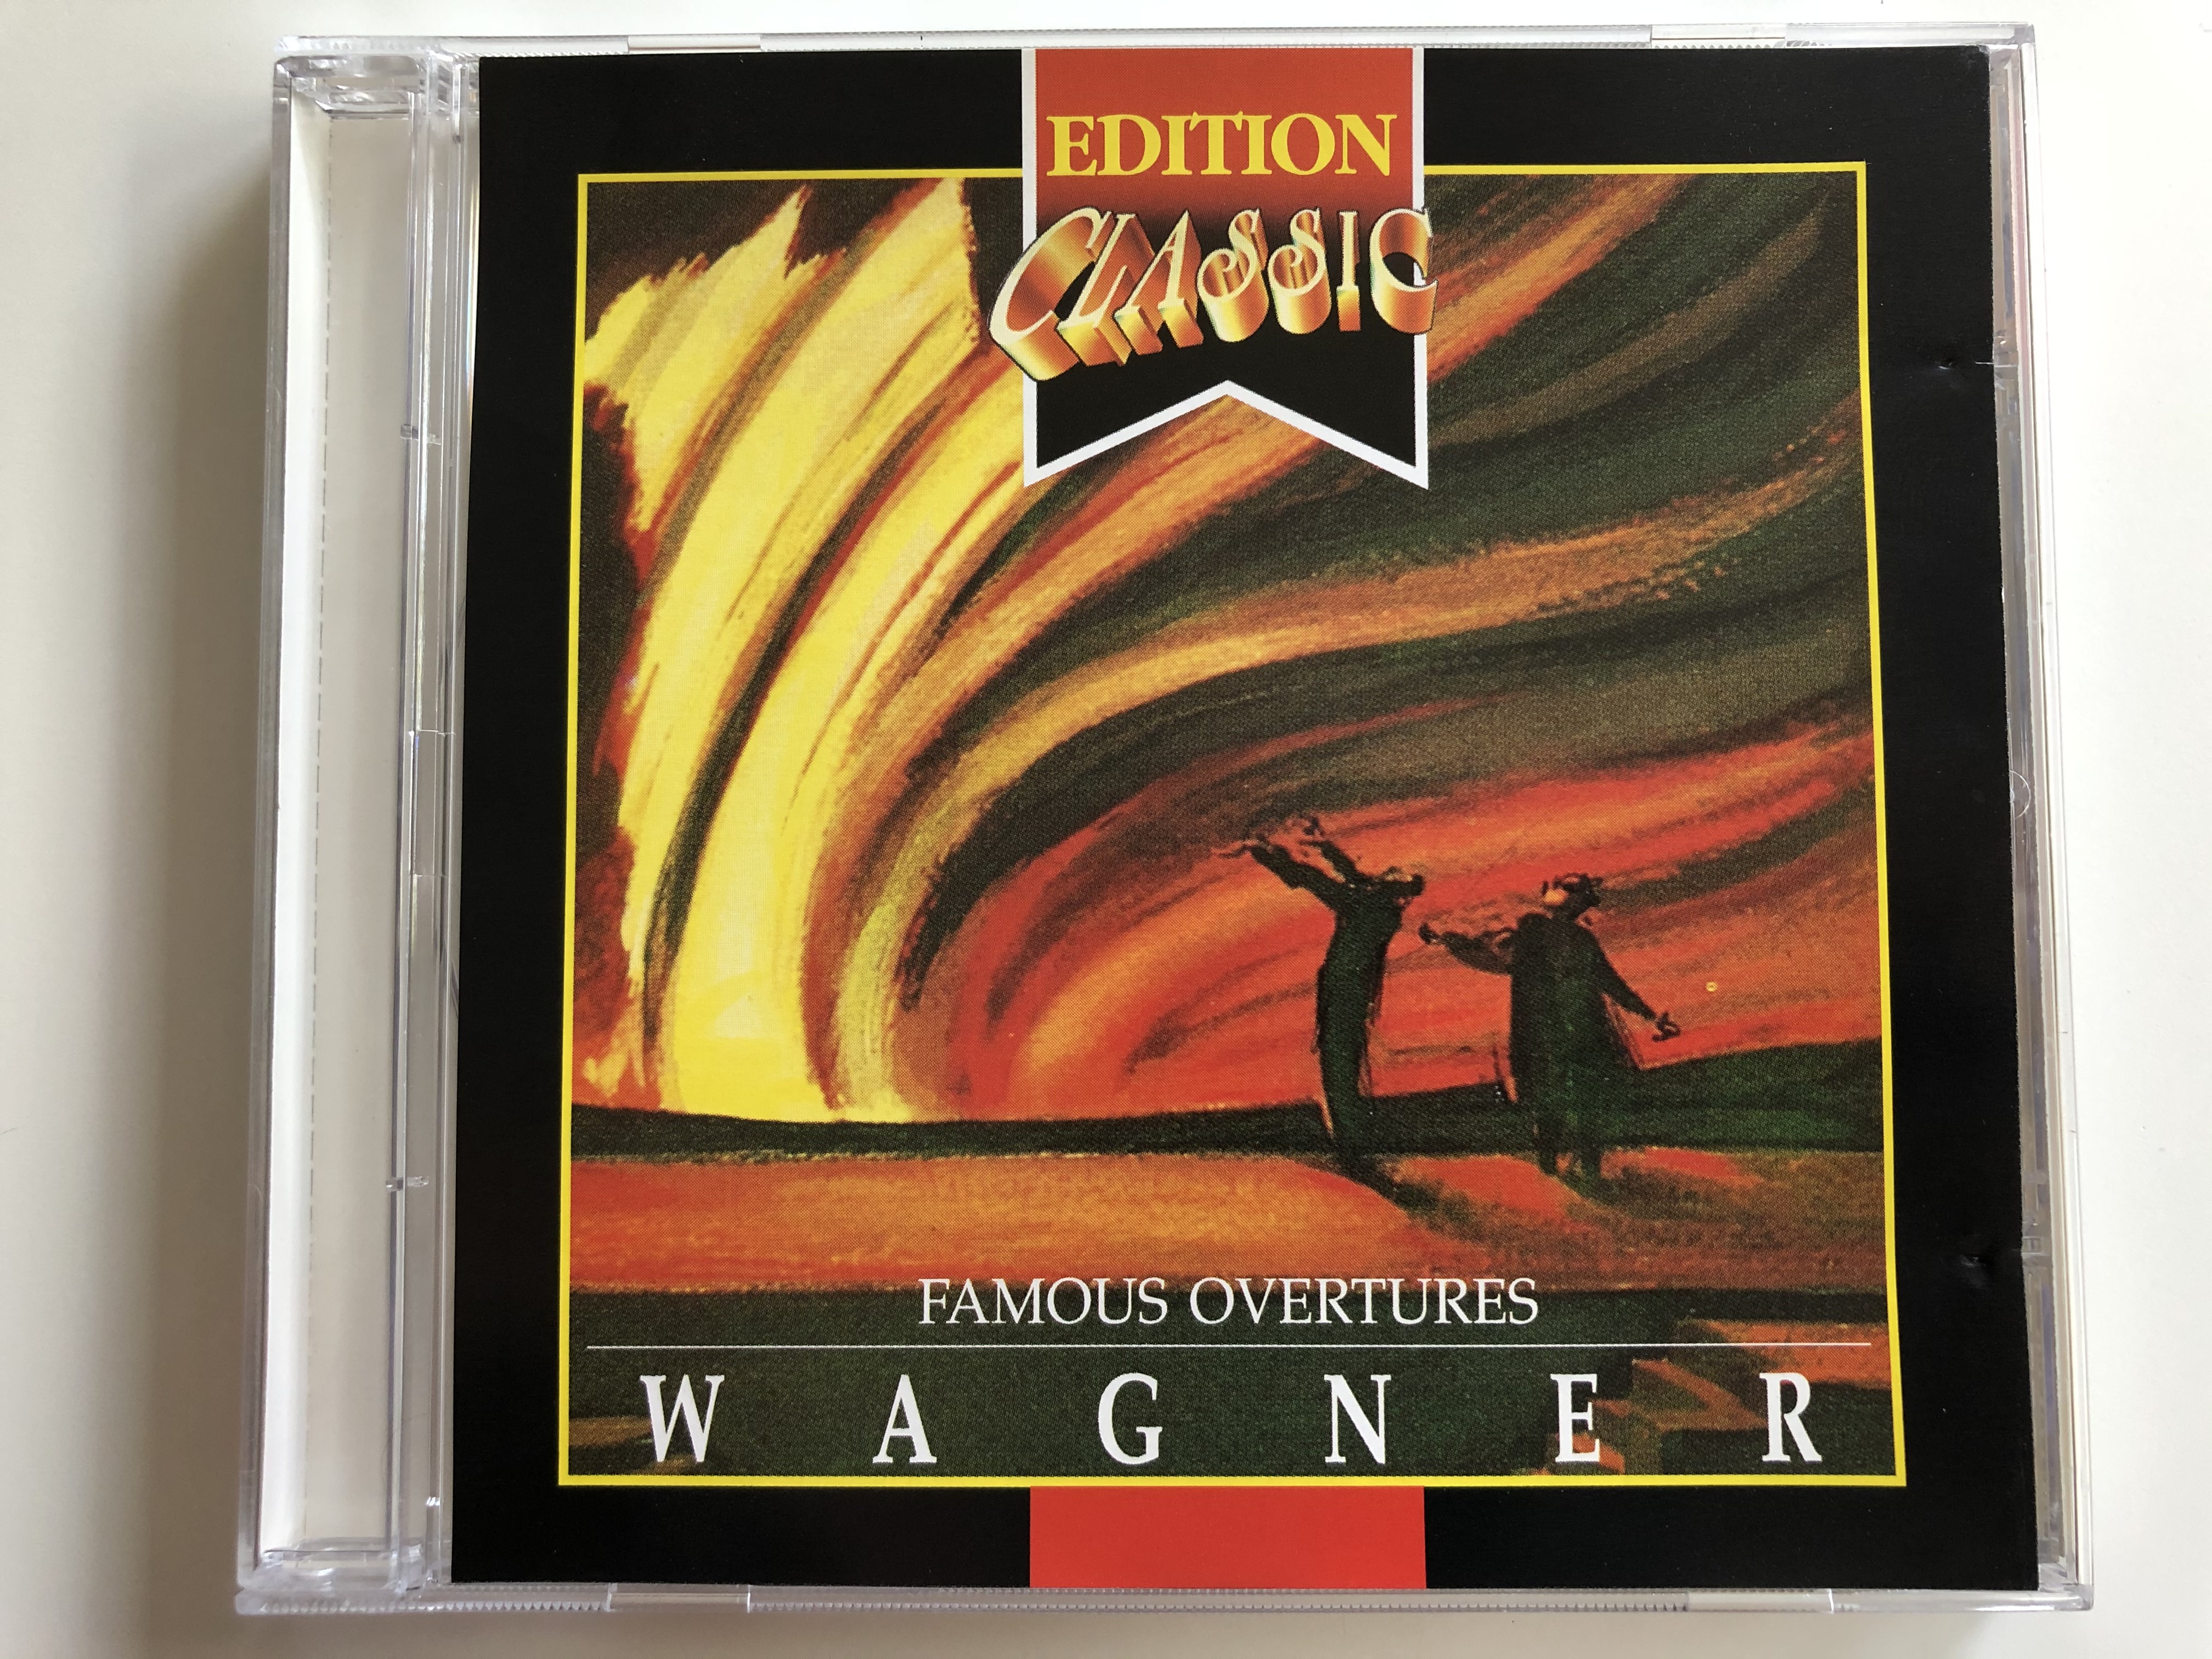 famous-overtures-wagner-edition-classic-audio-cd-1995-ec-1250-1-.jpg